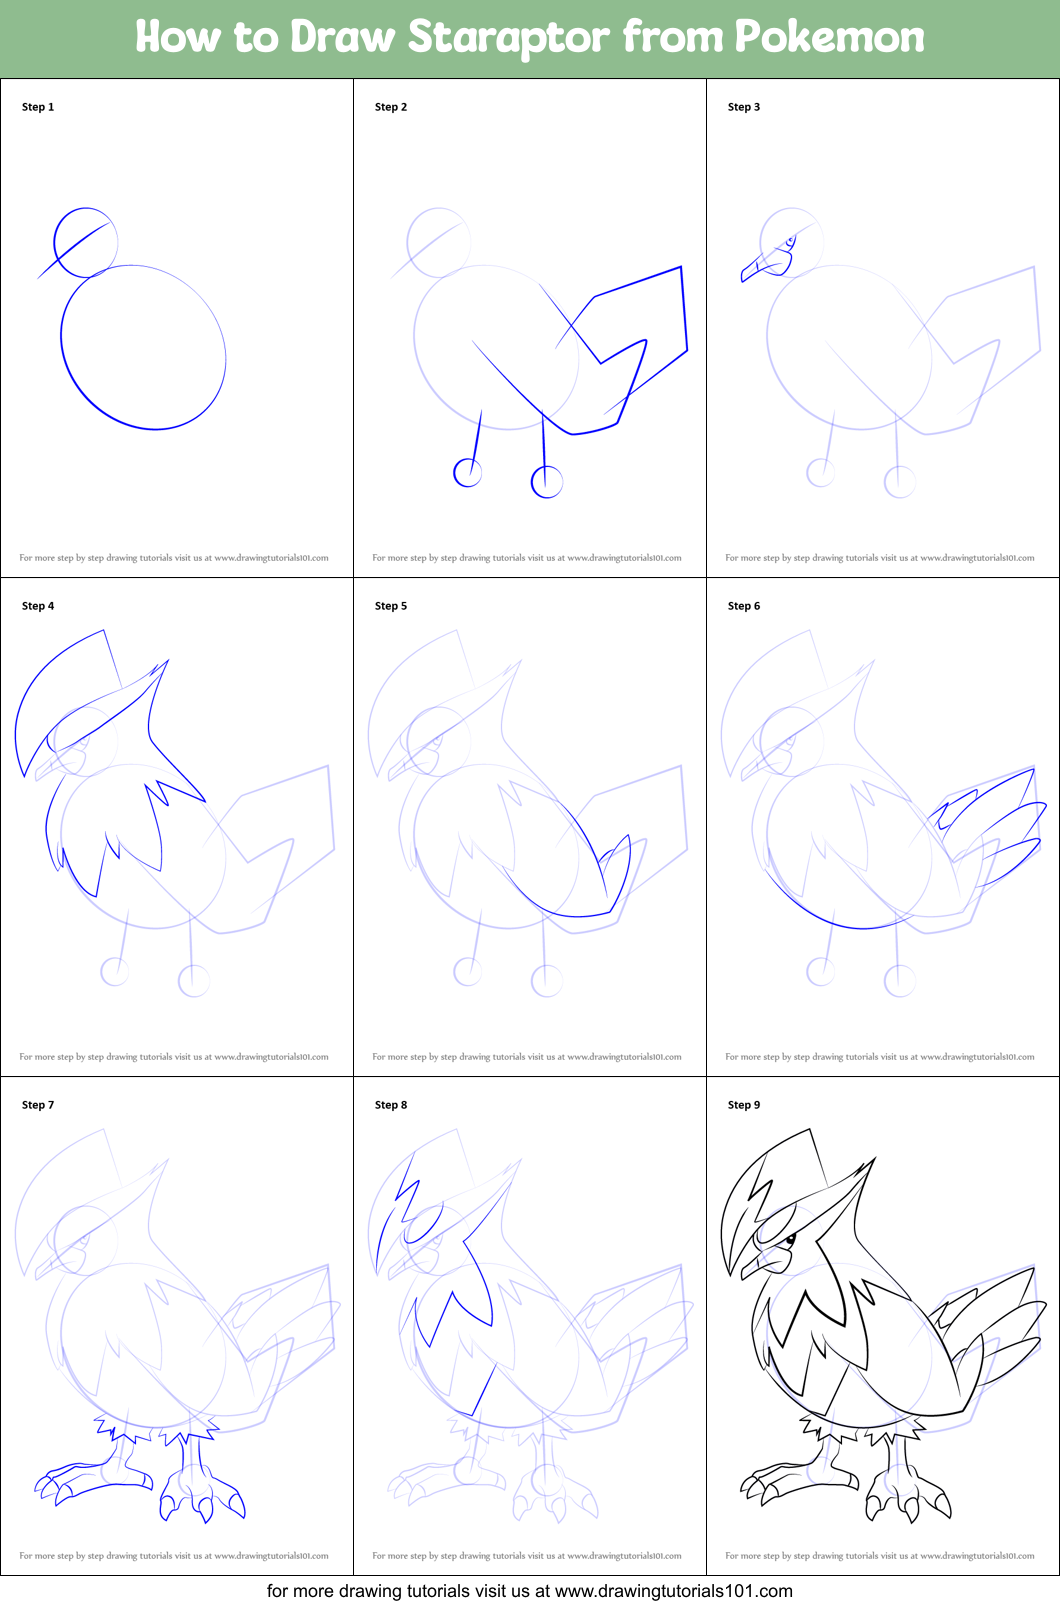 How to Draw Staraptor from Pokemon printable step by step drawing sheet